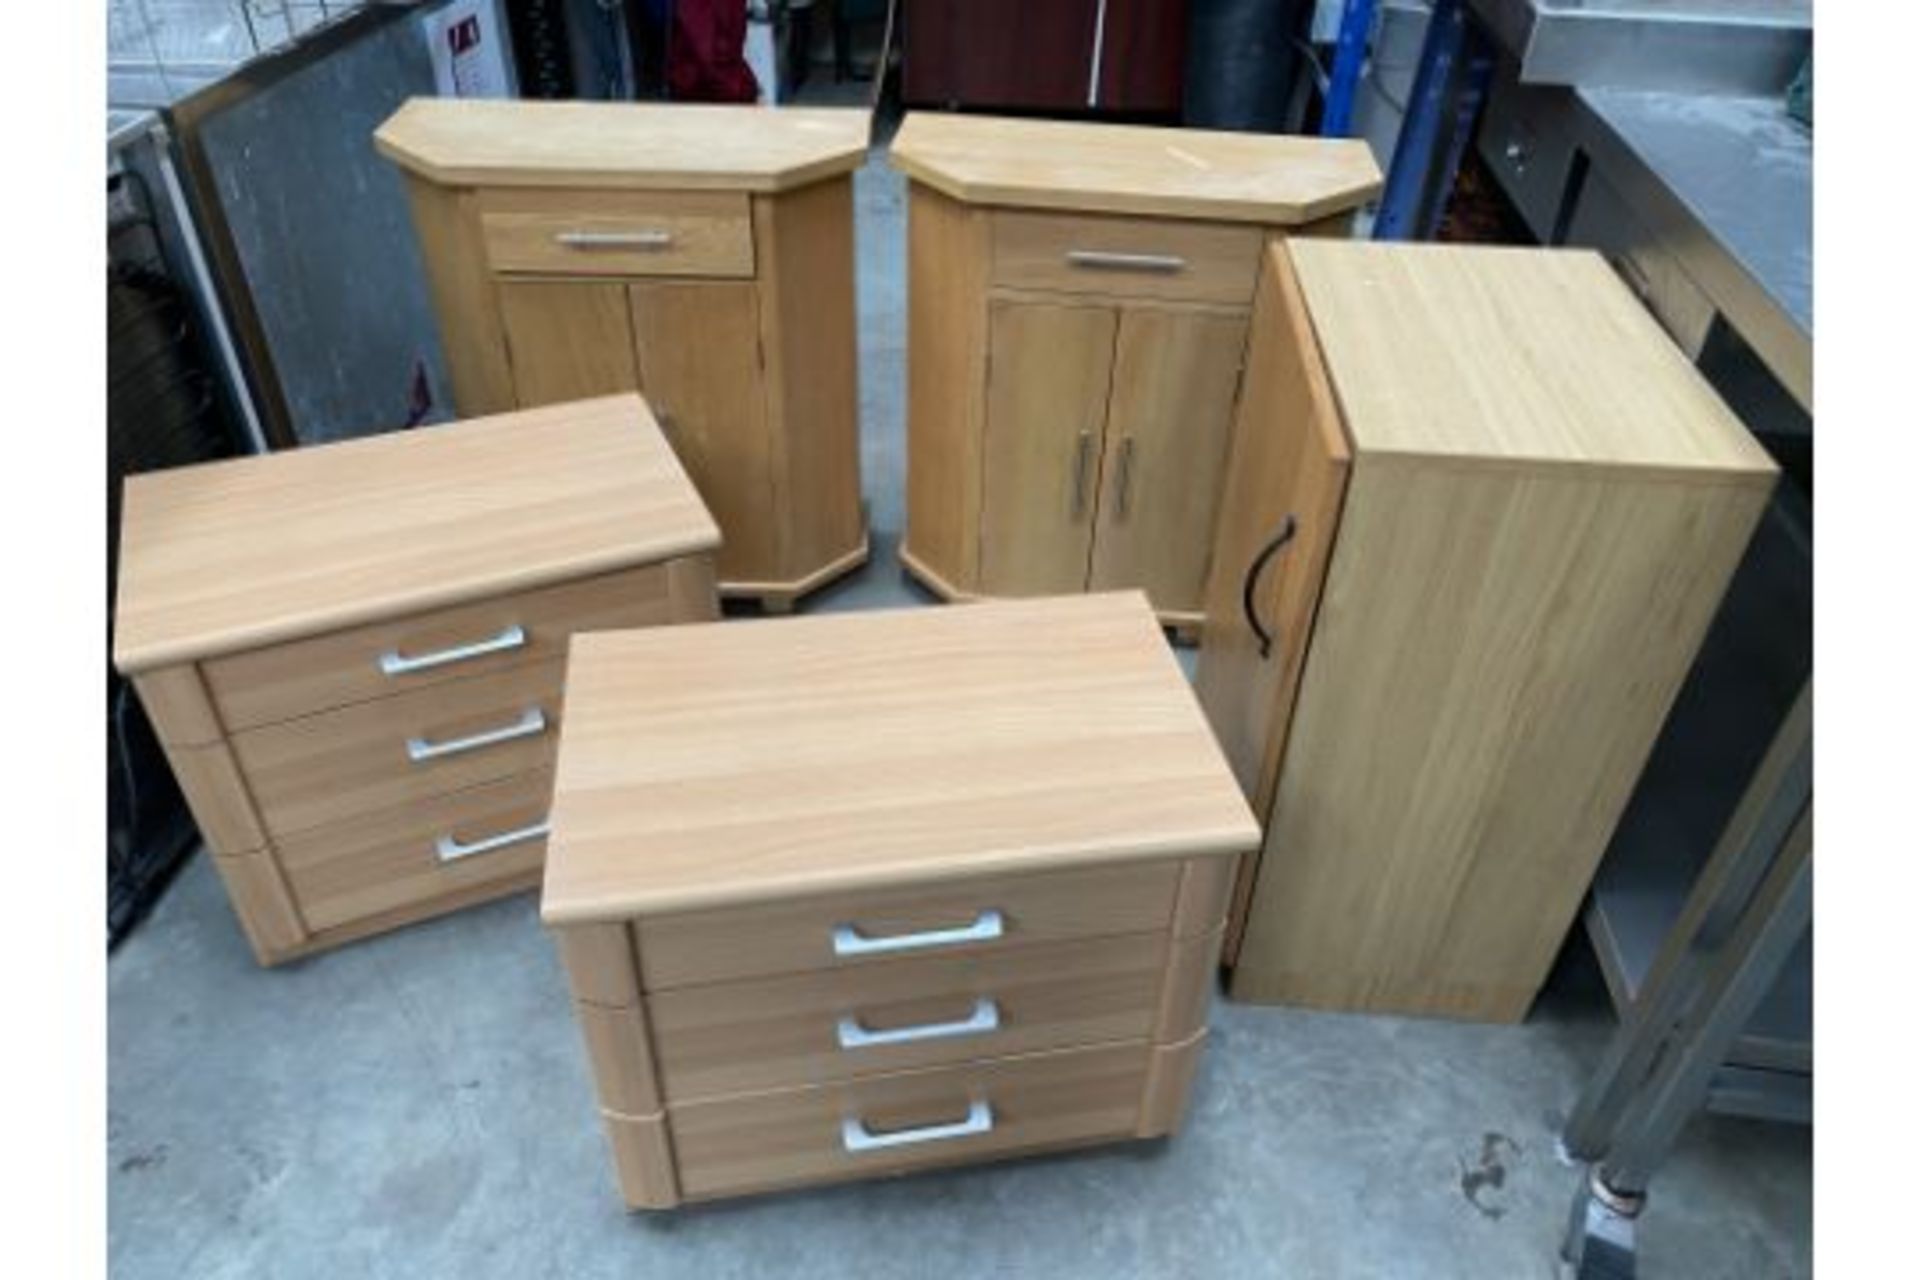 5 x Wooden Cupboards in Excellent Condition,